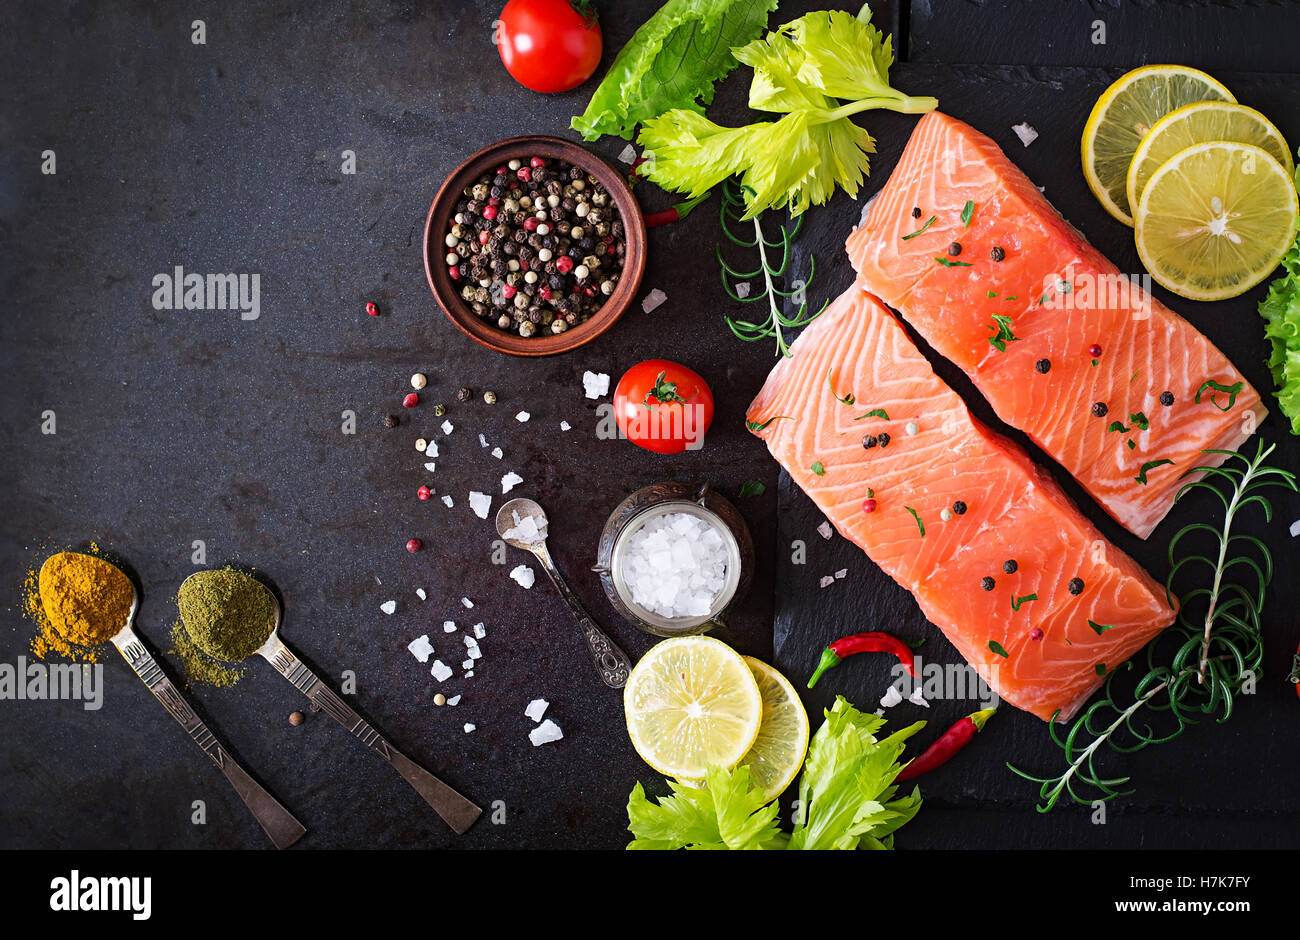 Raw salmon fillet and ingredients for cooking on a dark background in a rustic style. Top view Stock Photo